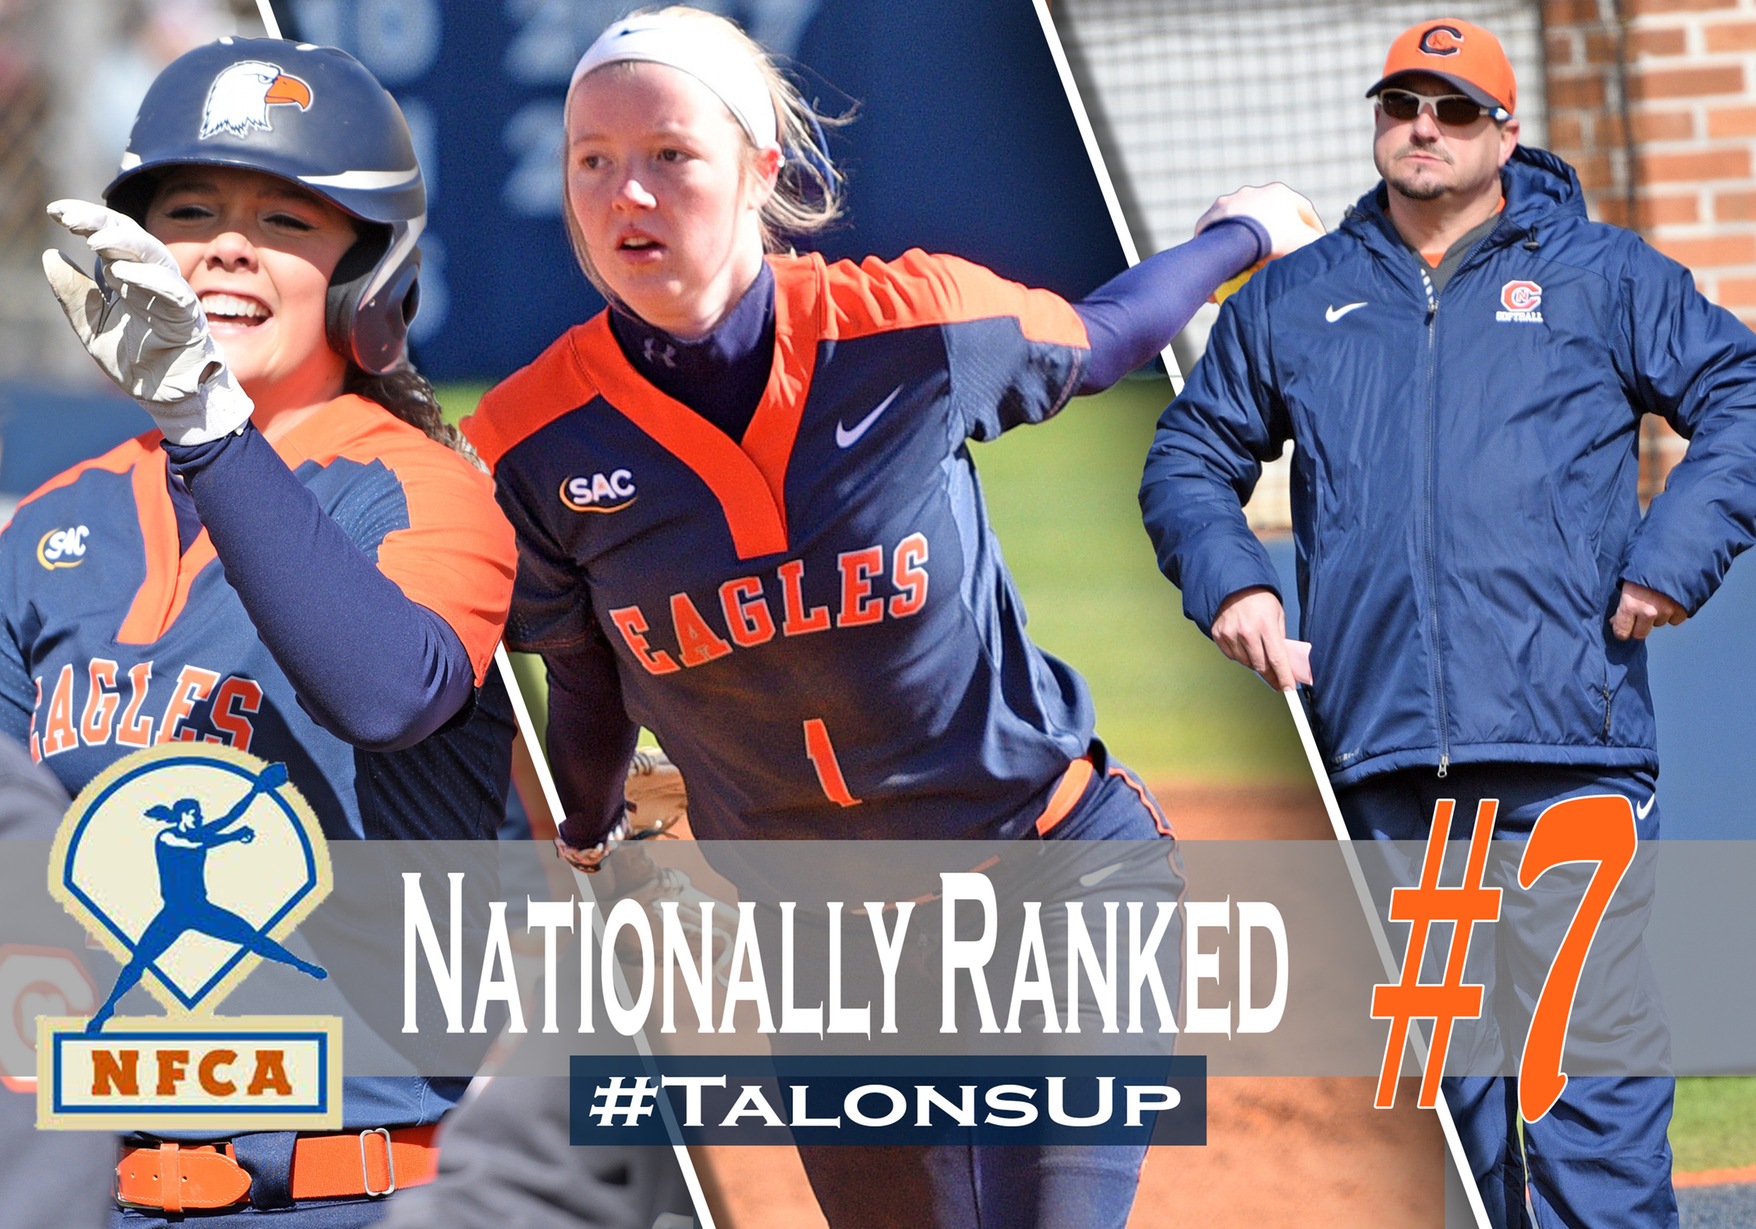 Eagles vault into NFCA Top 10, attain second highest NCAA ranking in program history